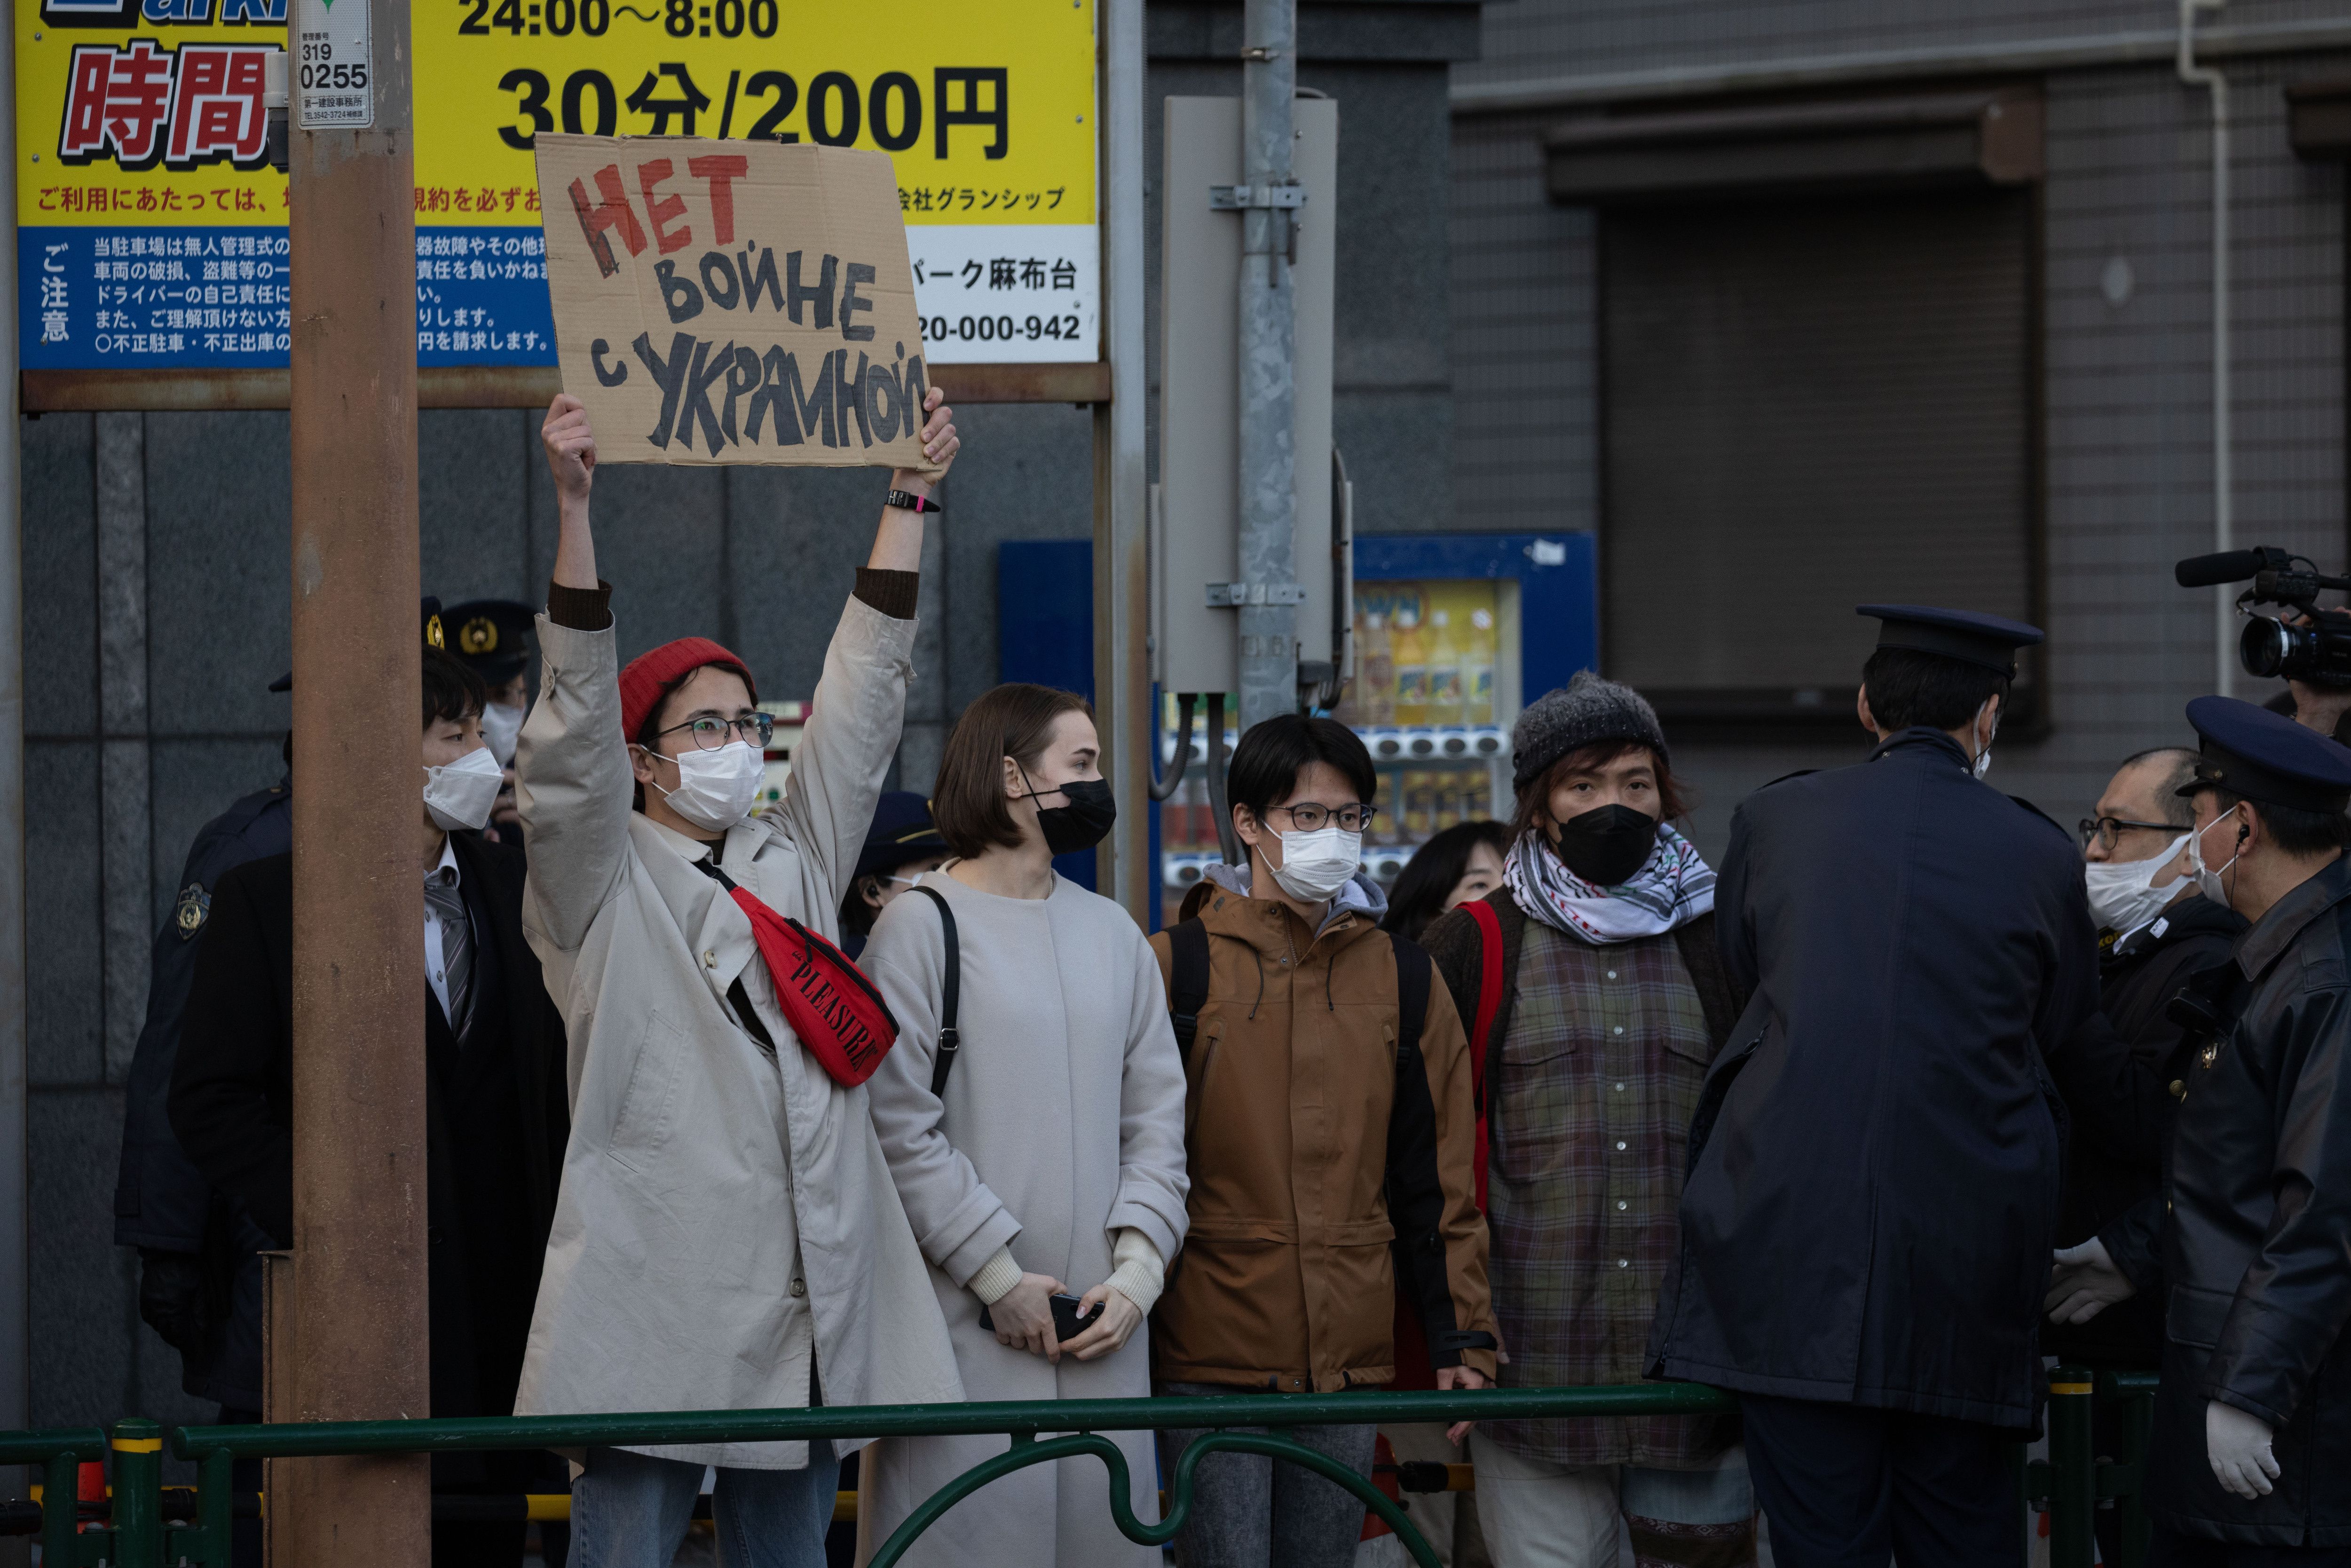 A protester holding a sign reading "No war with Ukraine" in front of the Russian Embassy in Tokyo on Feb. 24.